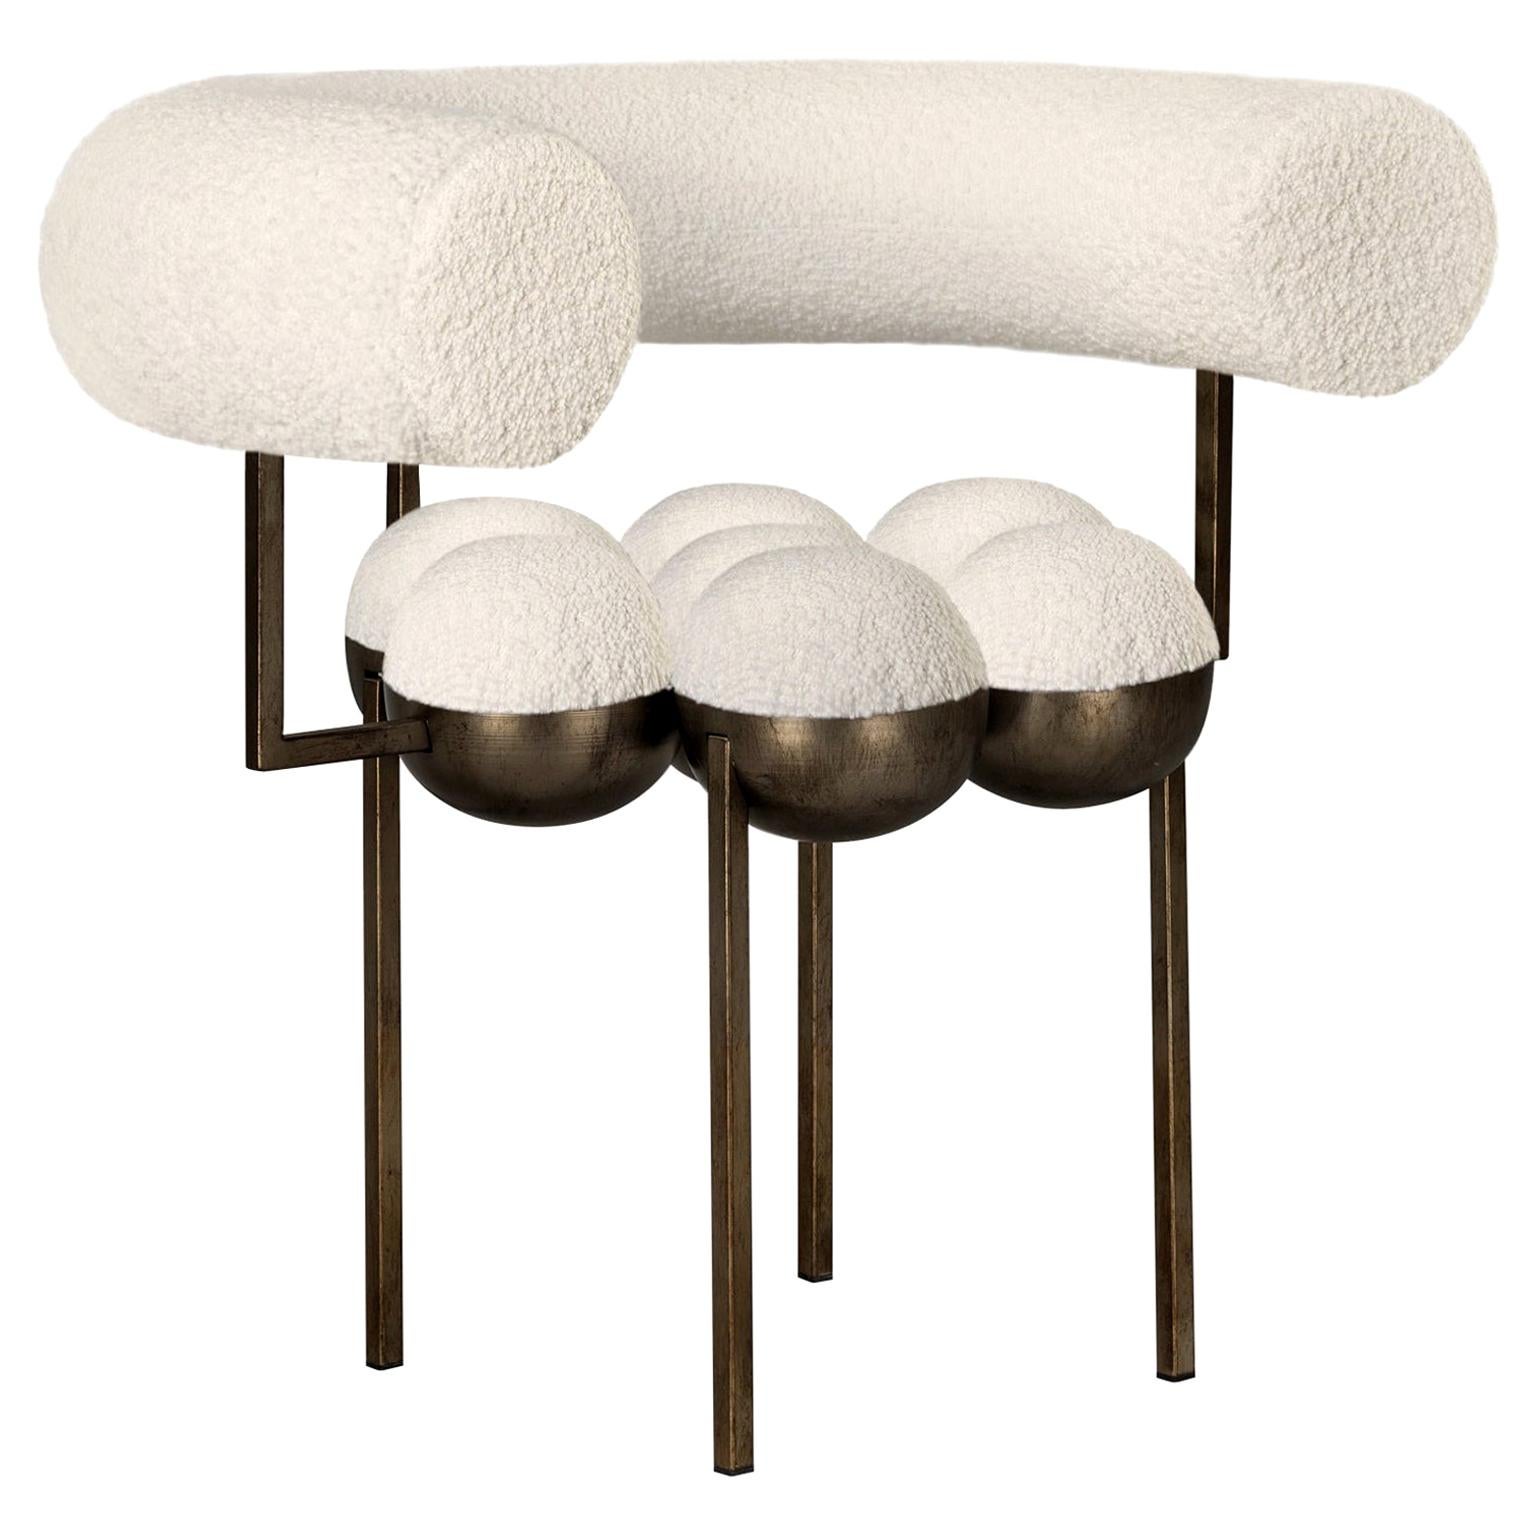 Saturn Chair Bronze Oxidized Steel and Cream Boucle Wool by Lara Bohinc in Stock